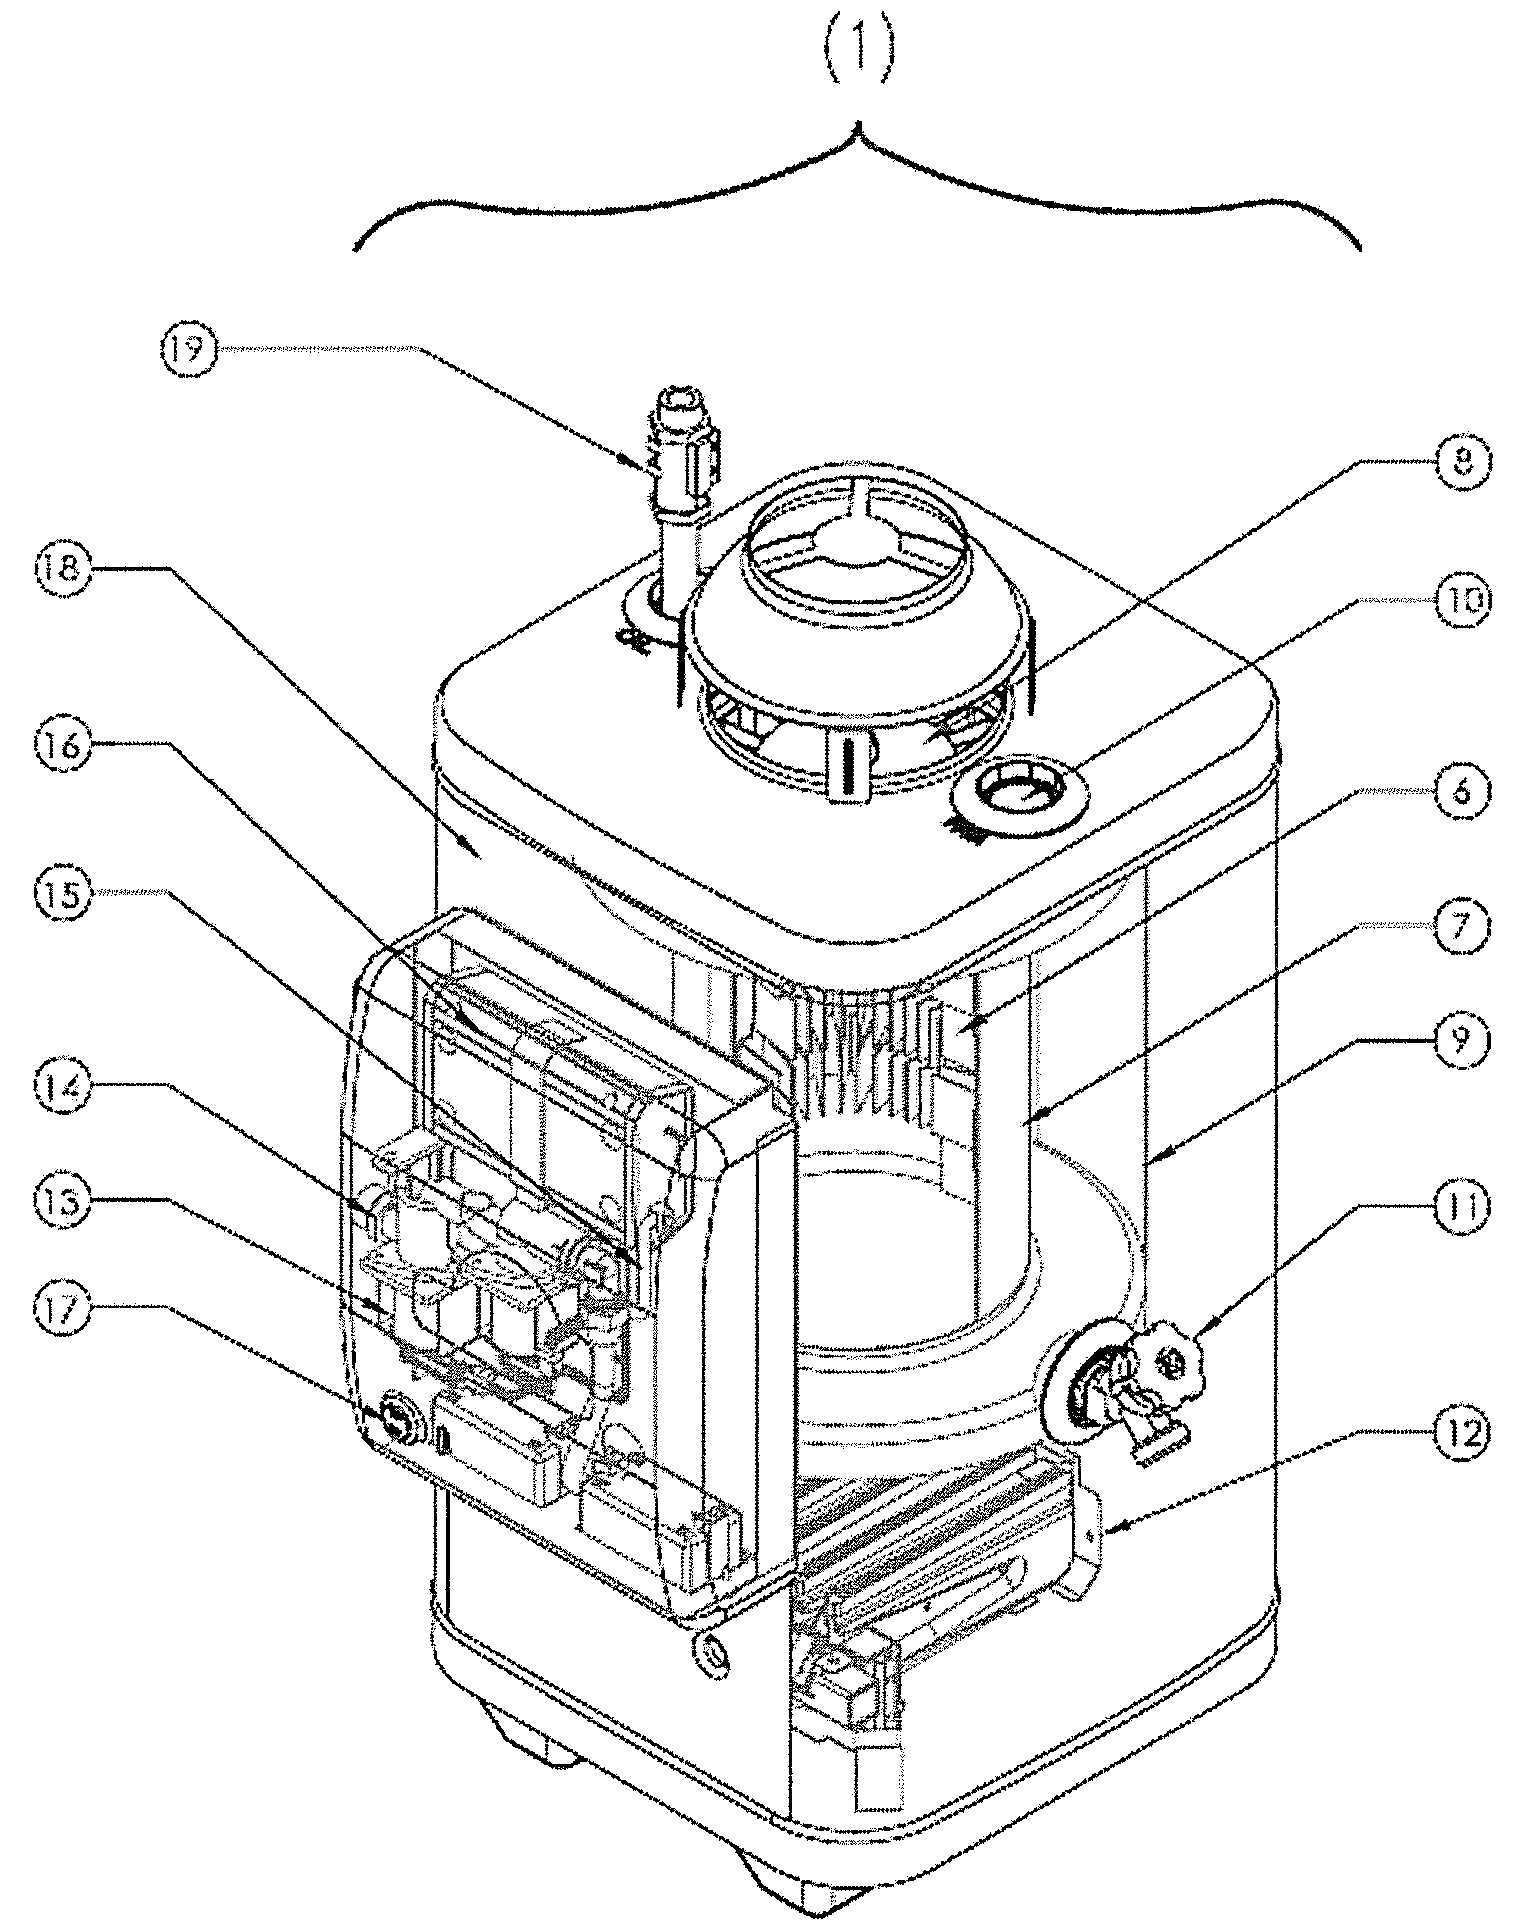 Water heater of endorsement with ionized ignition and electronic control of temperature, for solar heaters of the type thermosiphon